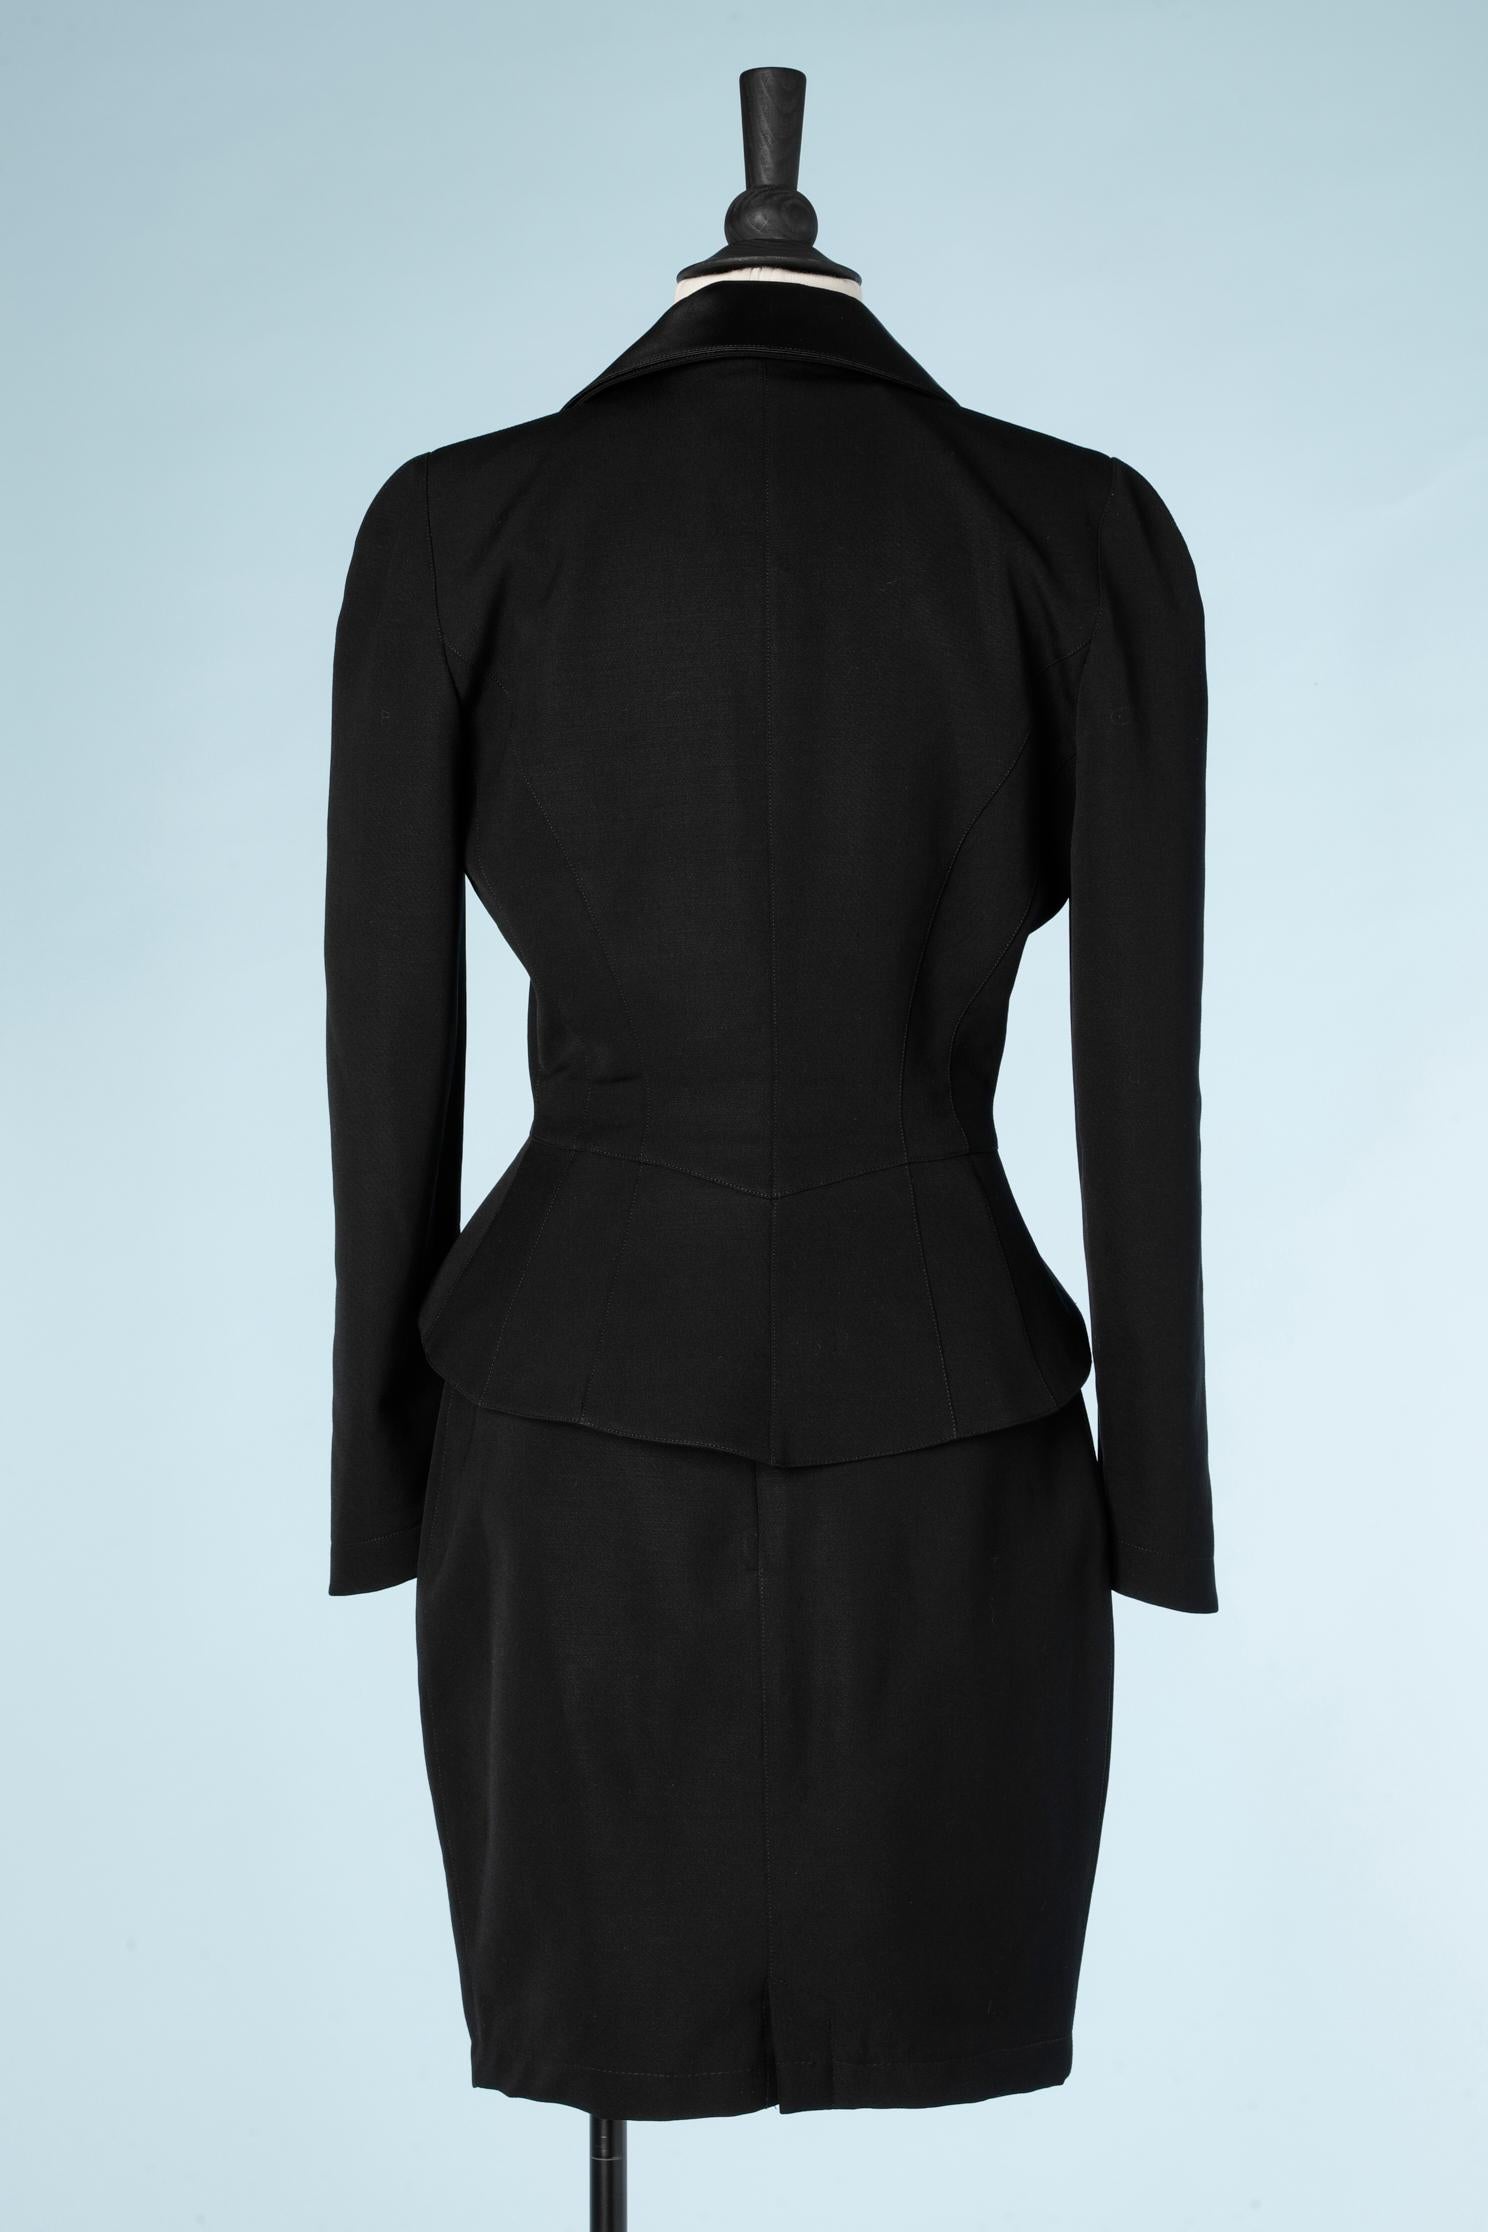 Black skirt suit in wool with black satin collar Thierry Mugler  In Excellent Condition For Sale In Saint-Ouen-Sur-Seine, FR